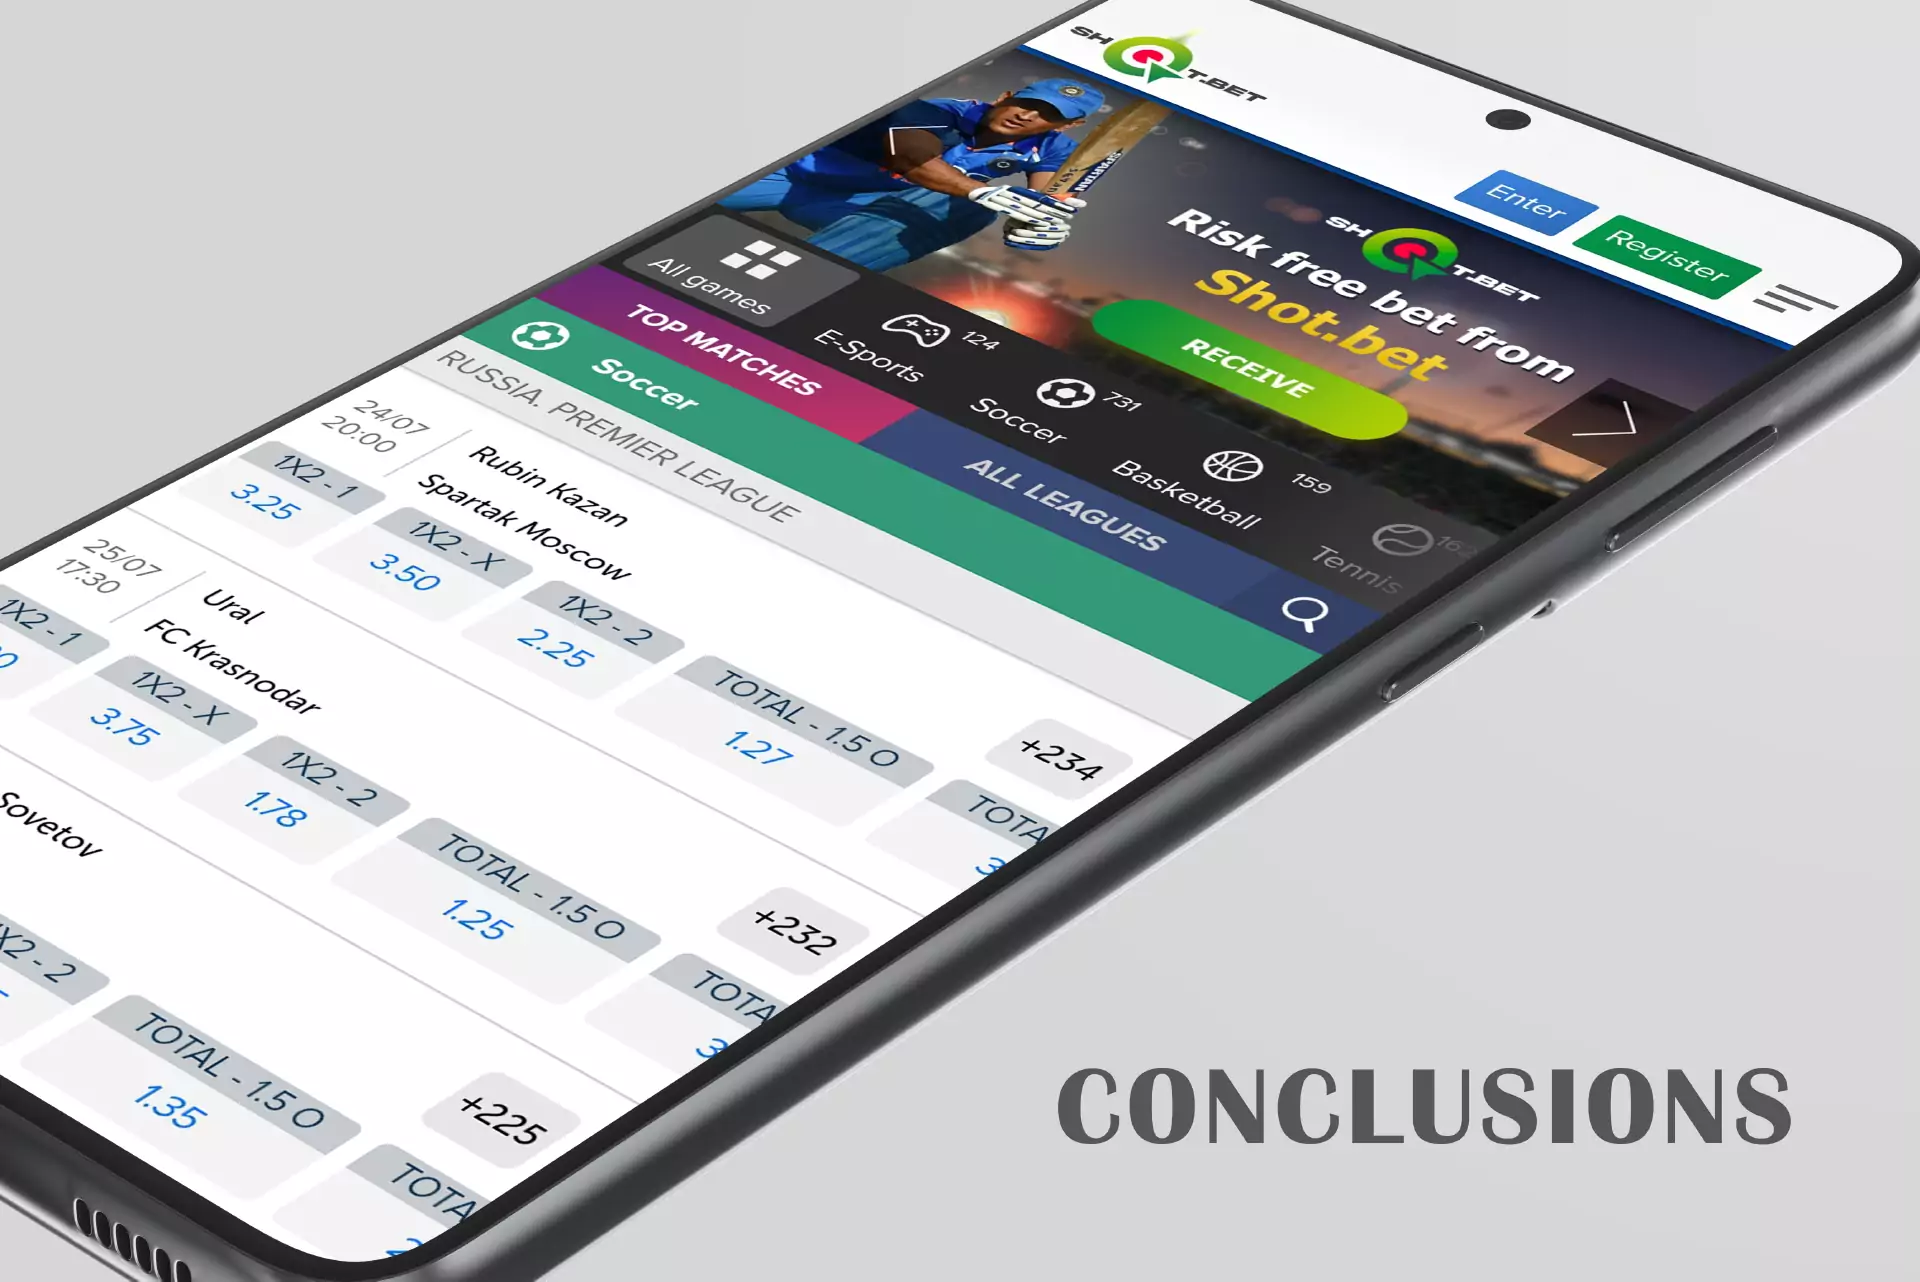 Our experts have analyzed the Shot Bet app in detail and made conclusions about it.